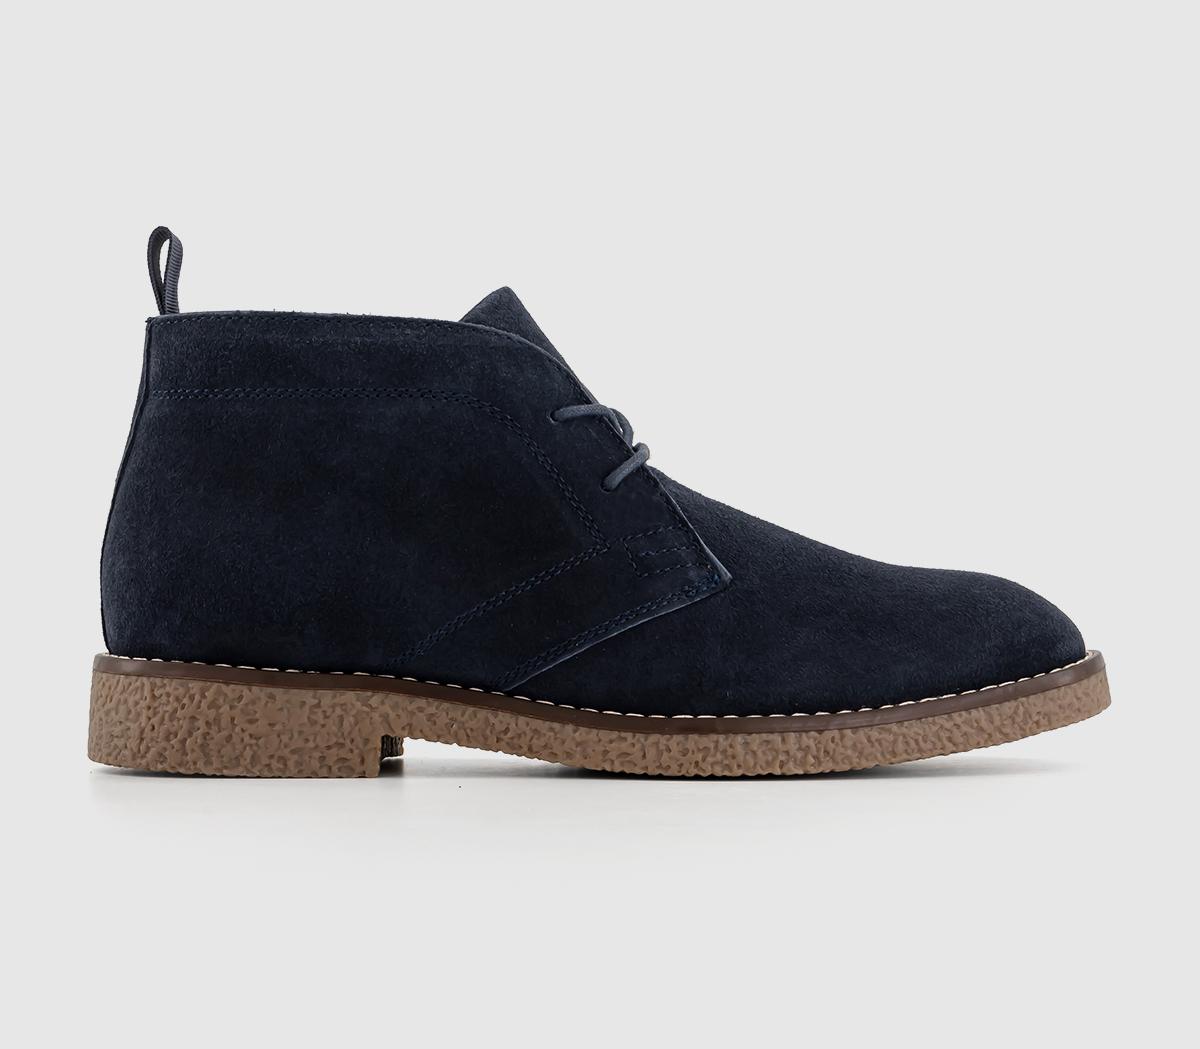 OFFICE Byron Crepe Look Chukka Boots Navy Suede - Men’s Boots